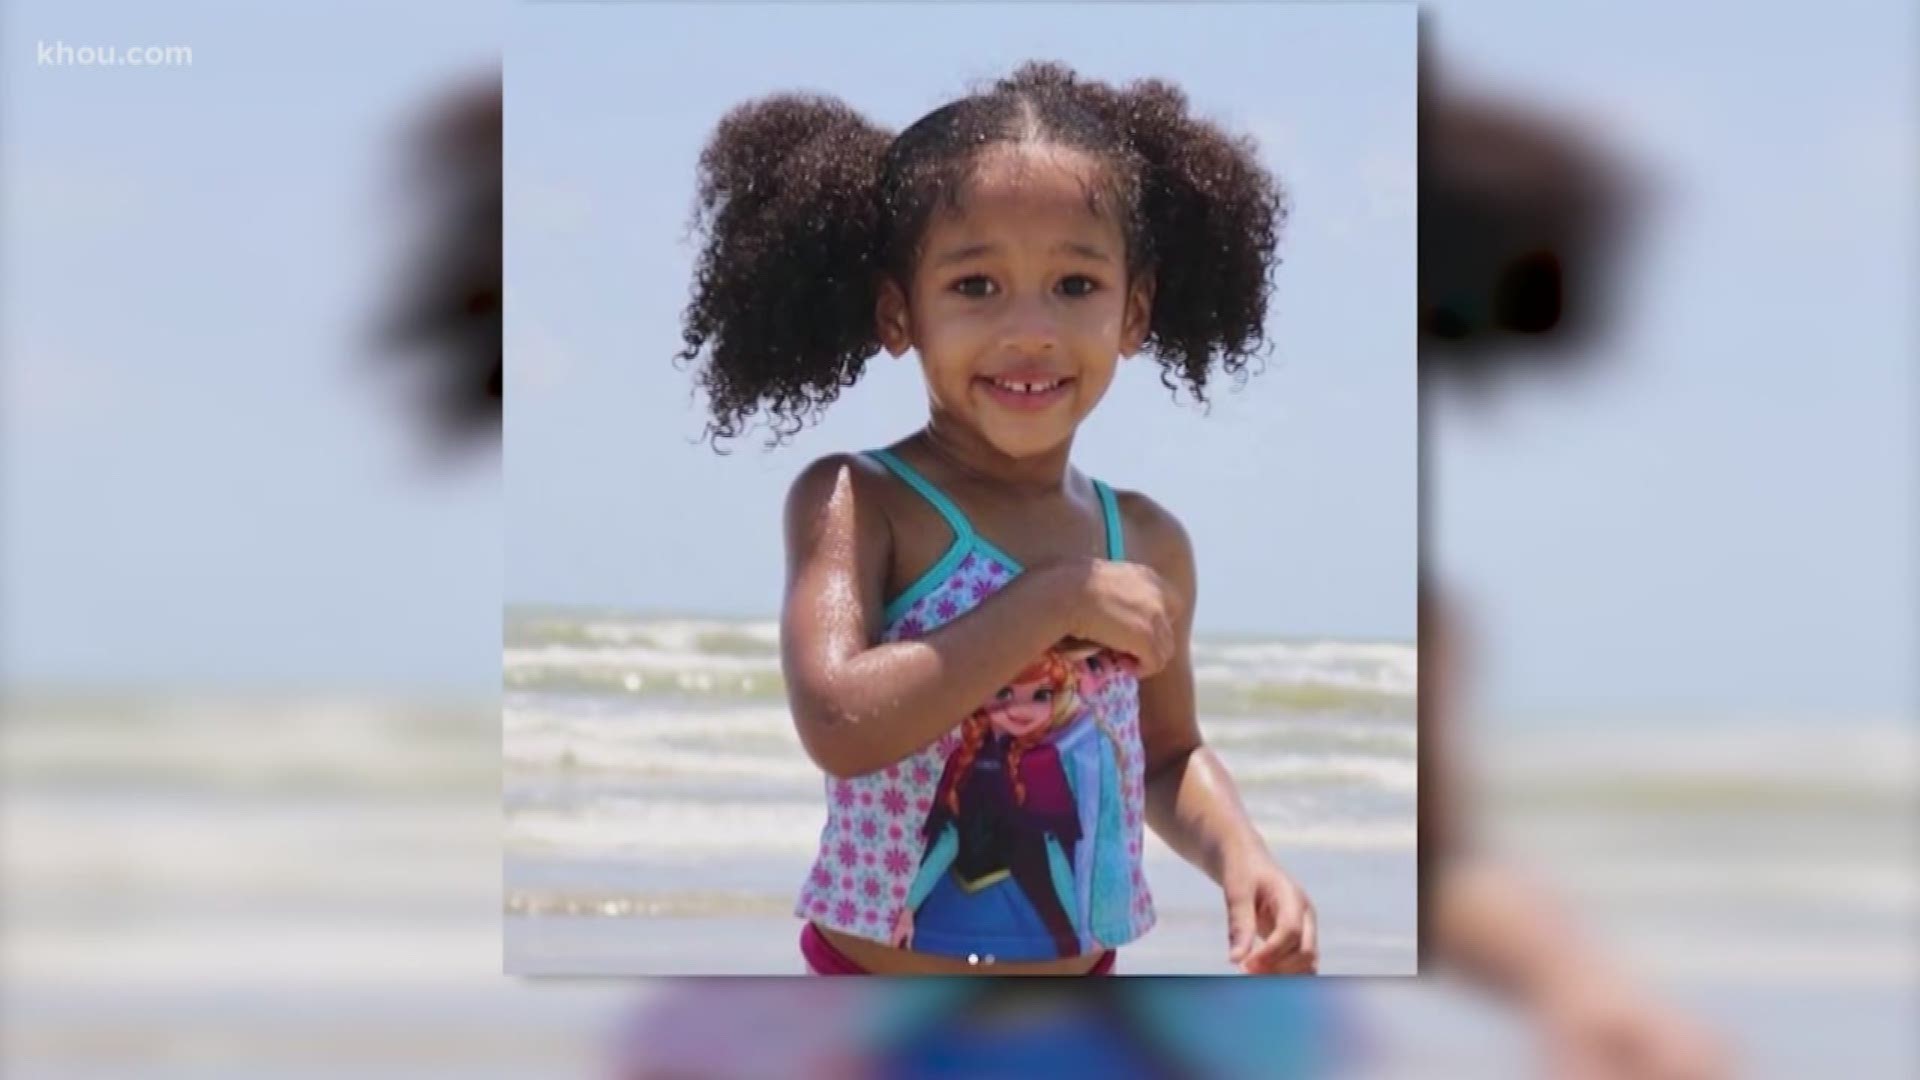 Volunteers are still hopeful in their search for little Maleah Davis, the 4-year-old Houston girl who has been missing for more than a week.